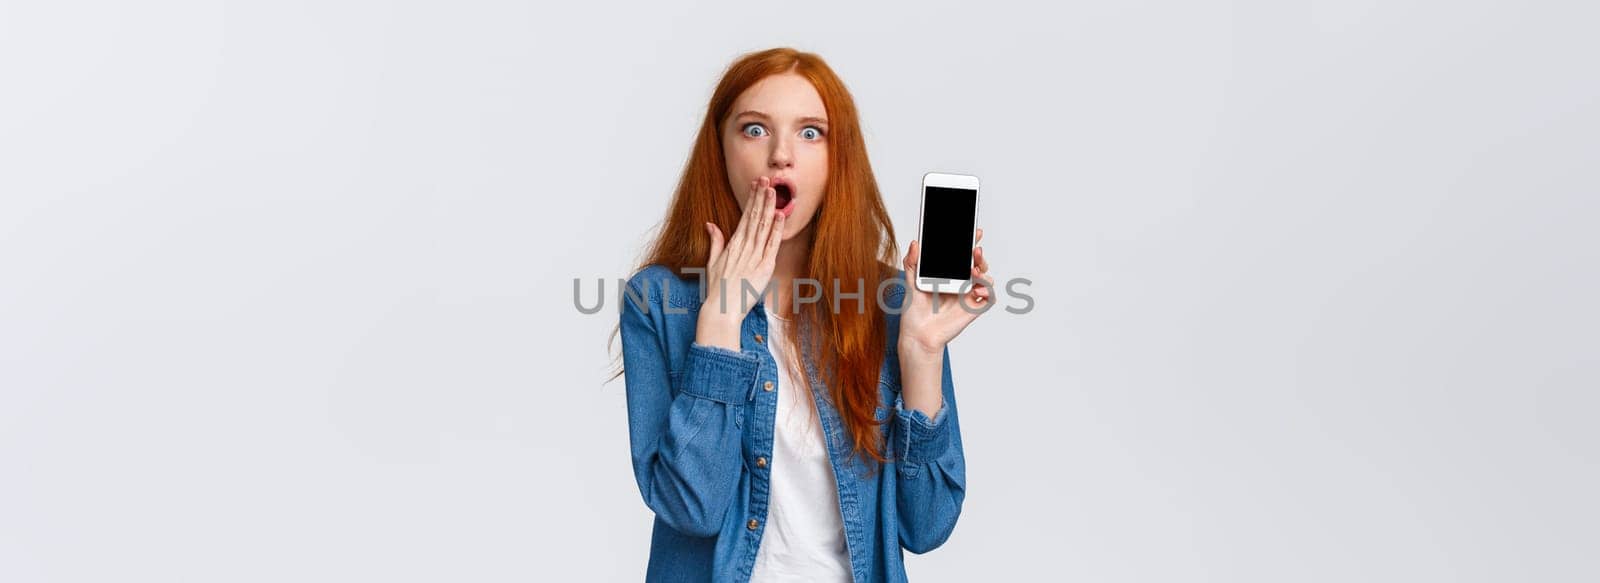 Impressed and astonished redhead woman seeing something unbelievable, spilling tea in internet, gasping cover opened mouth and showing samrtphone display, white background.